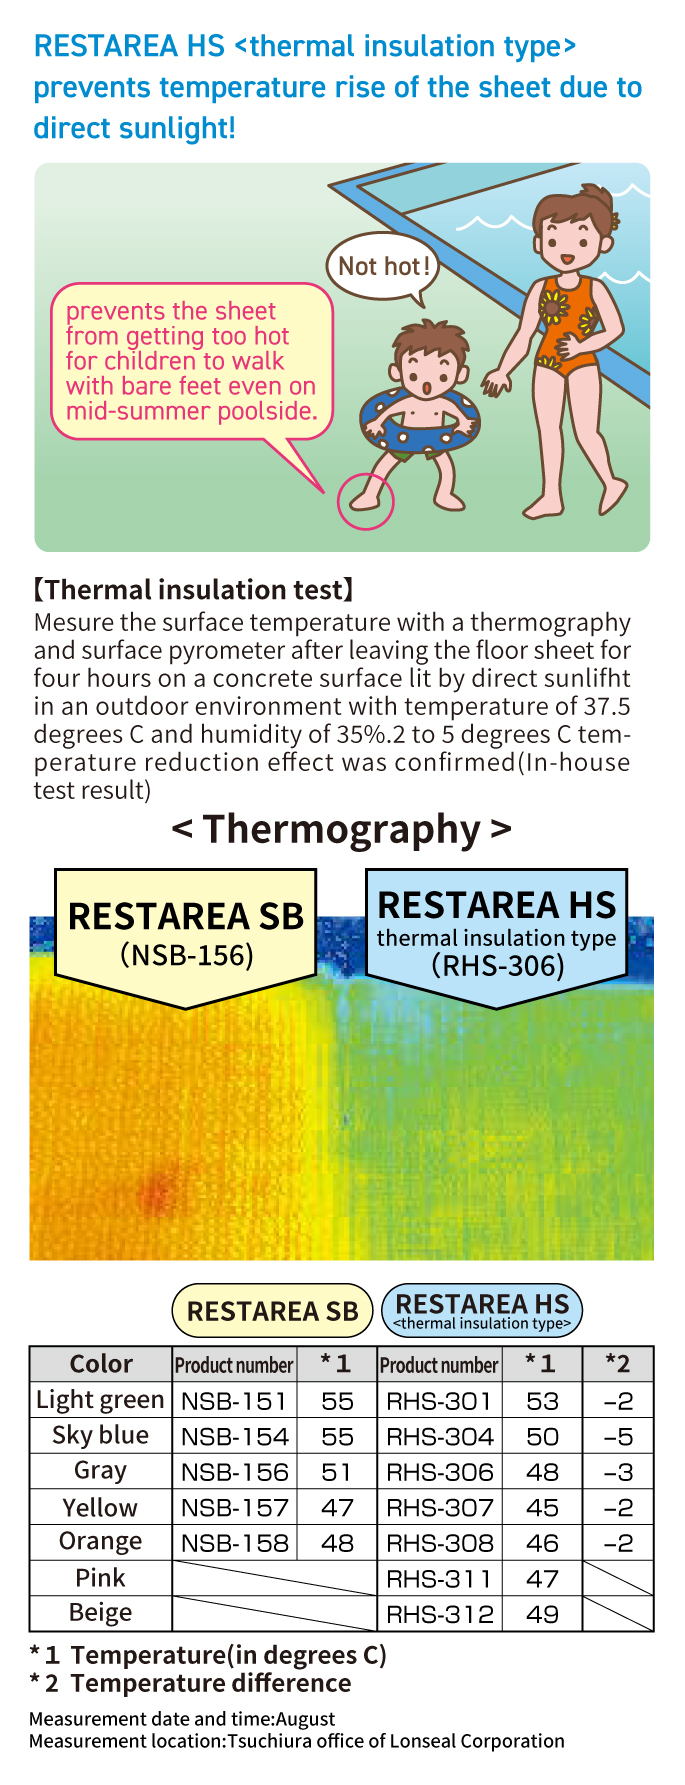 RESTARIA HS <thermal insulation type> prevents temperature rise of the sheet due to direct sunlight!